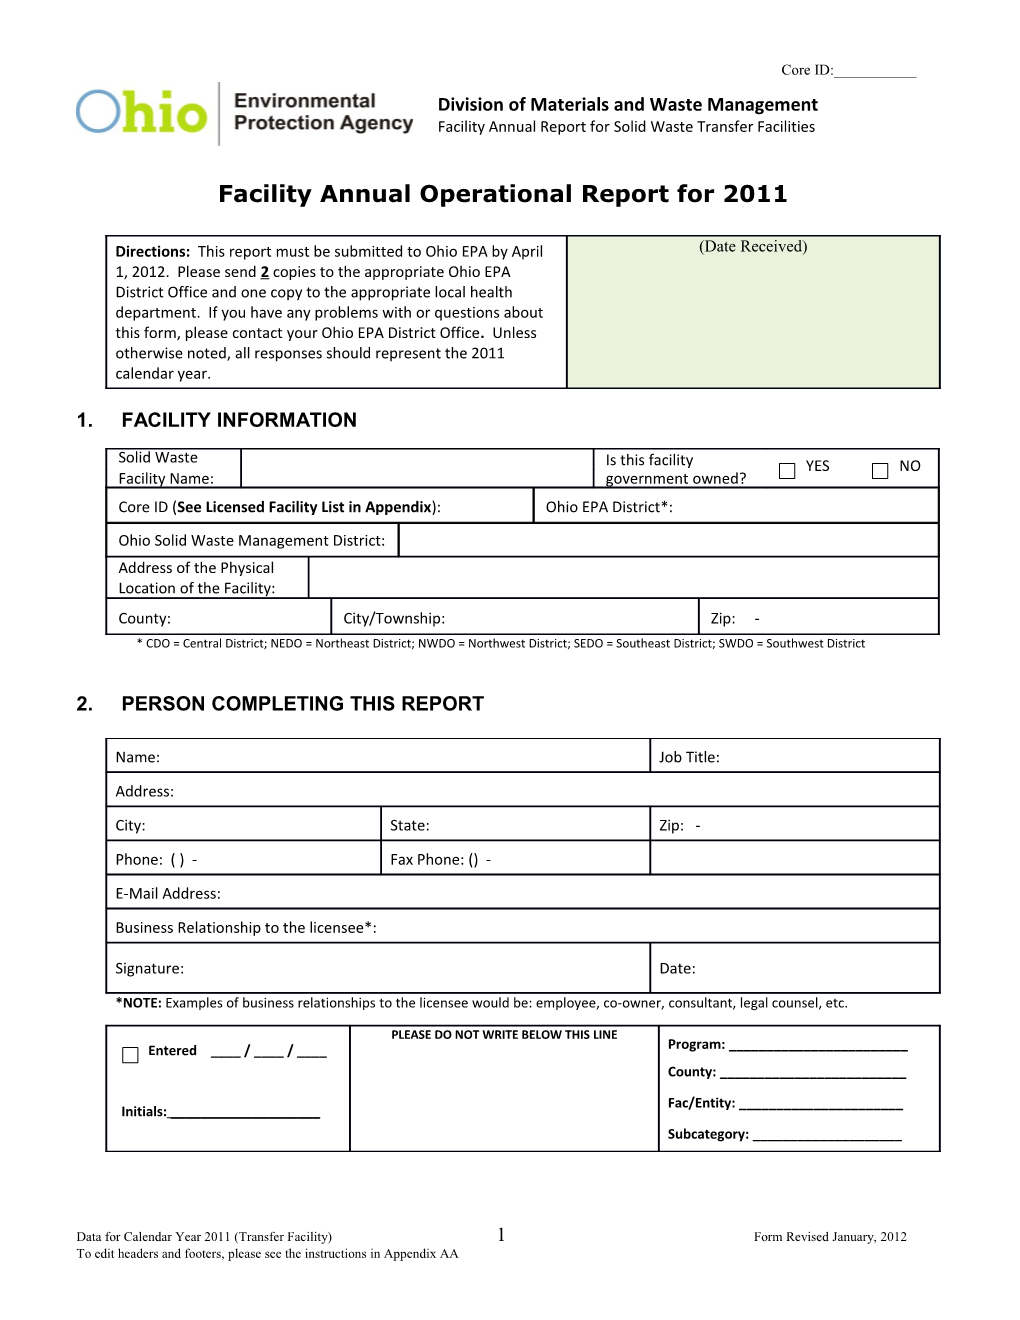 Facility Annual Operational Report for 2011